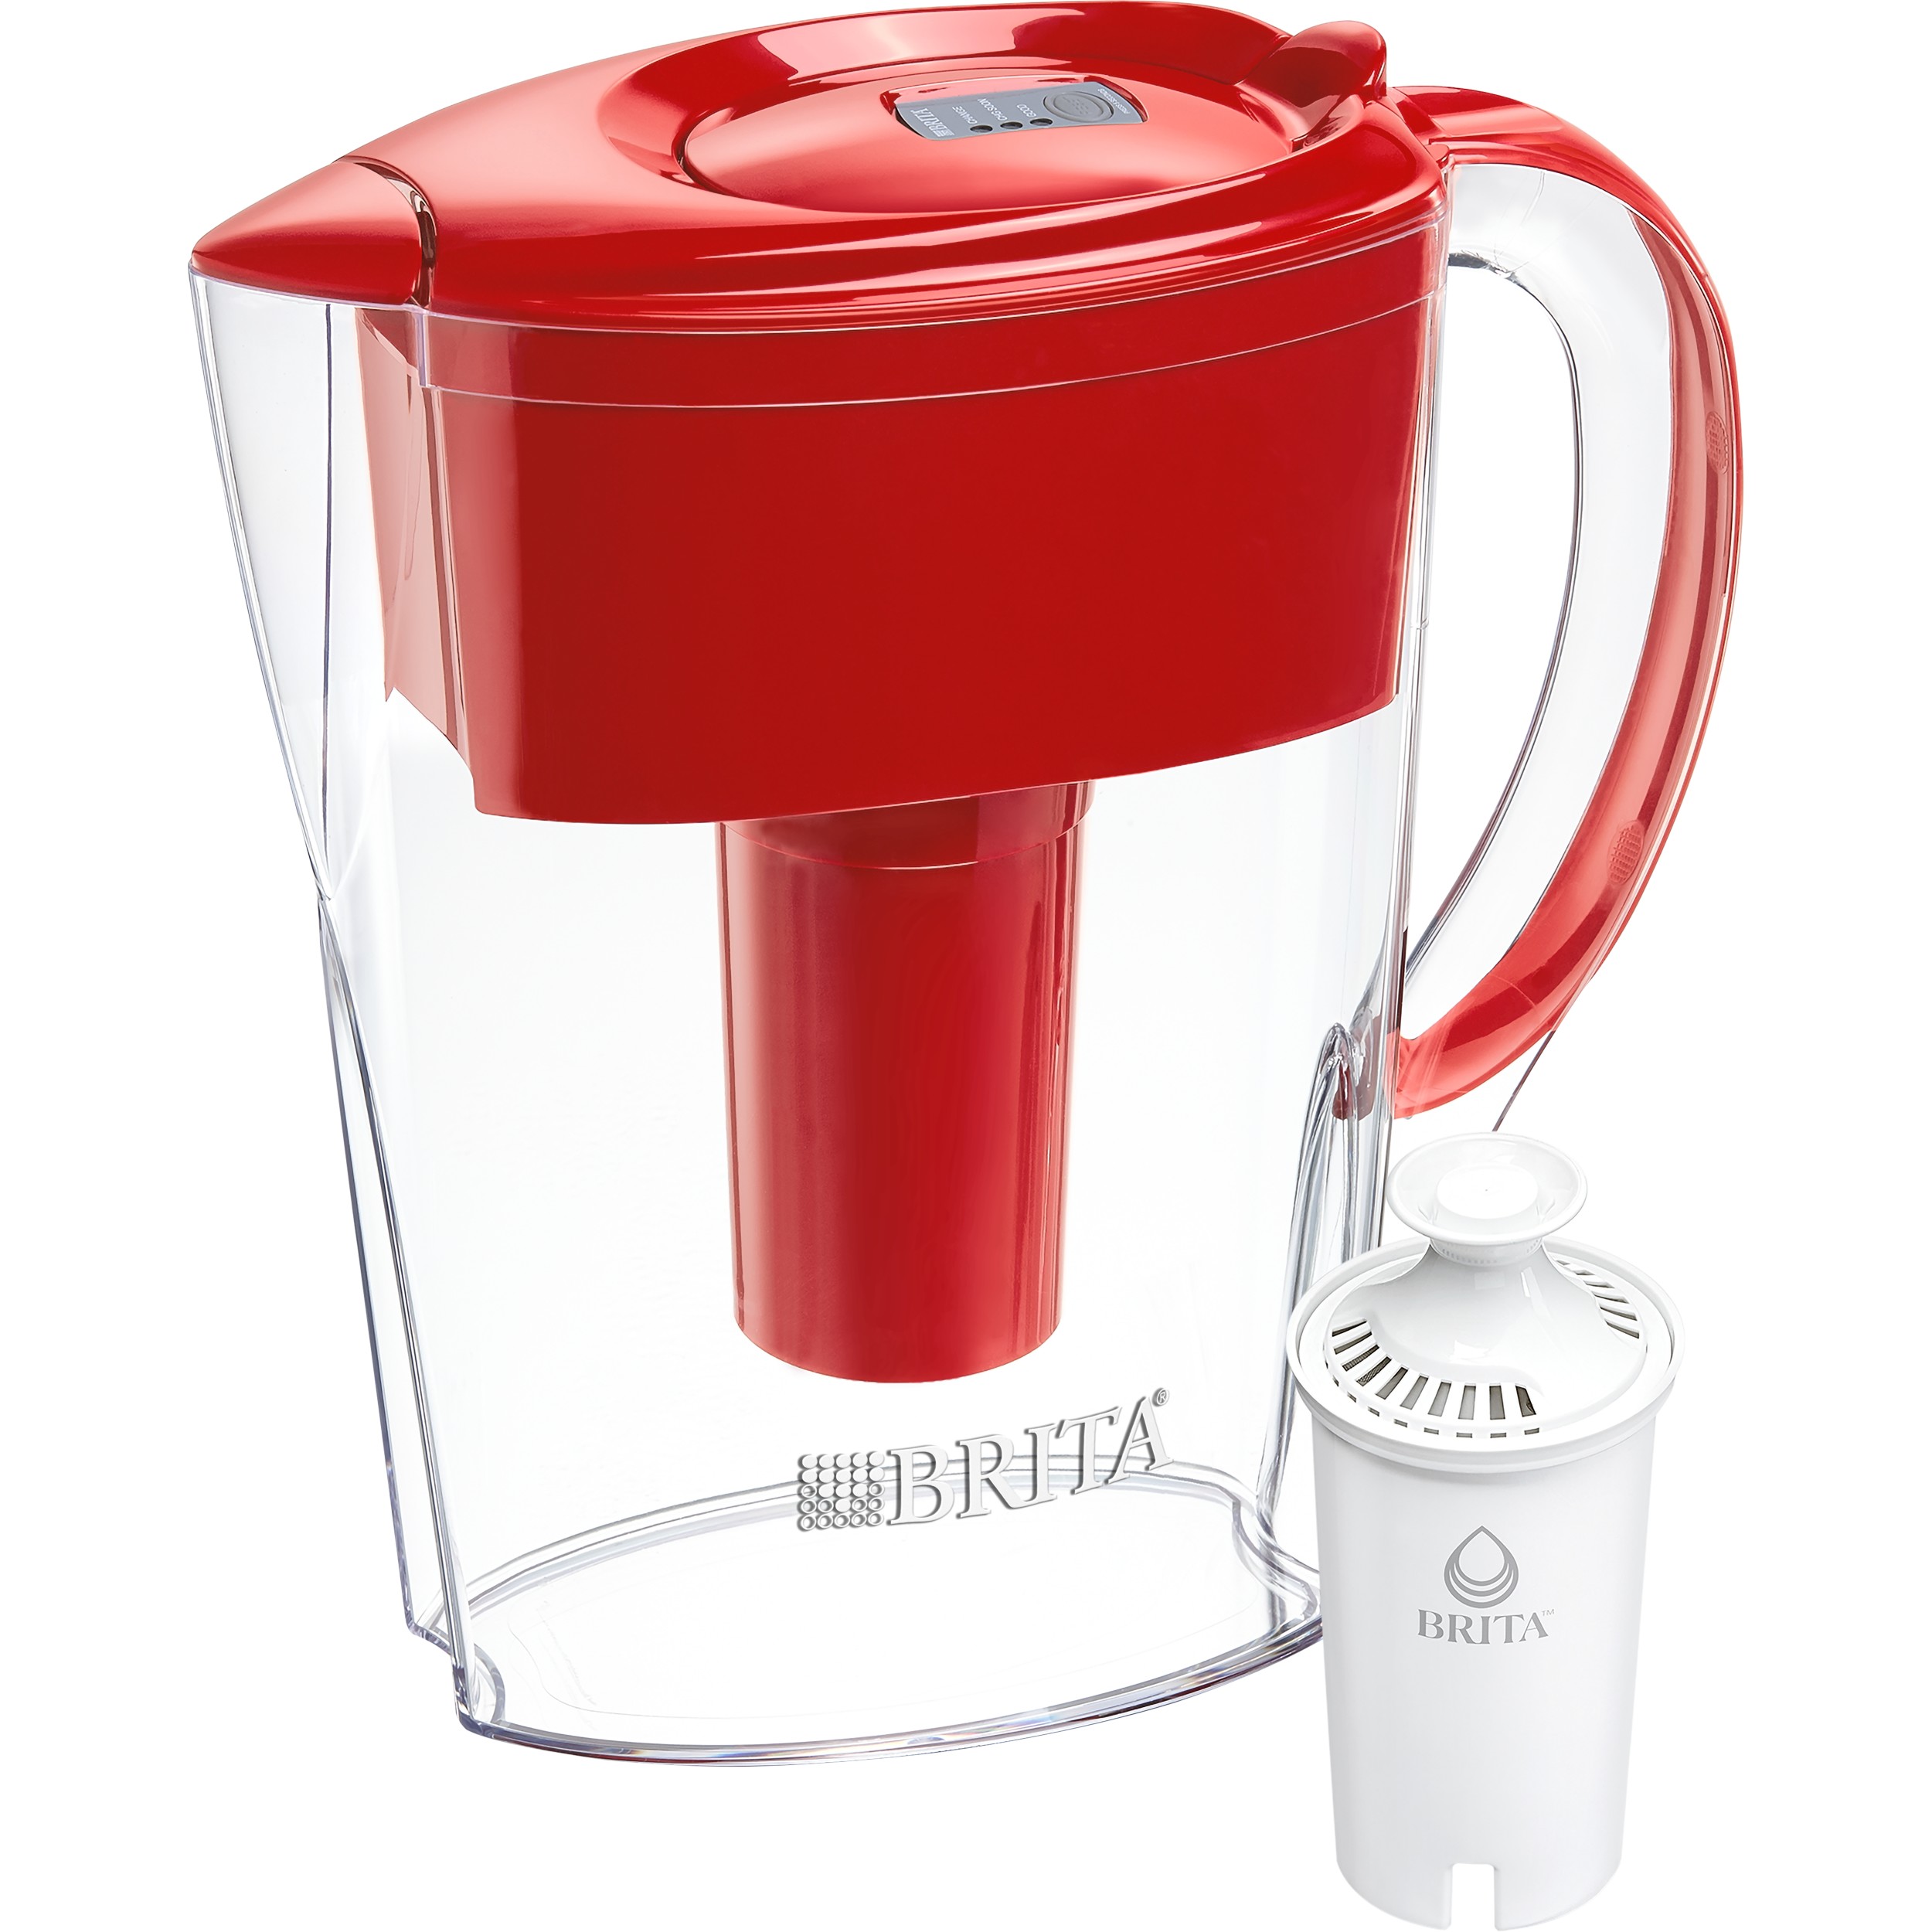 Brita Space Saver Water Filter Pitcher, 6 Cup - Red - image 1 of 10